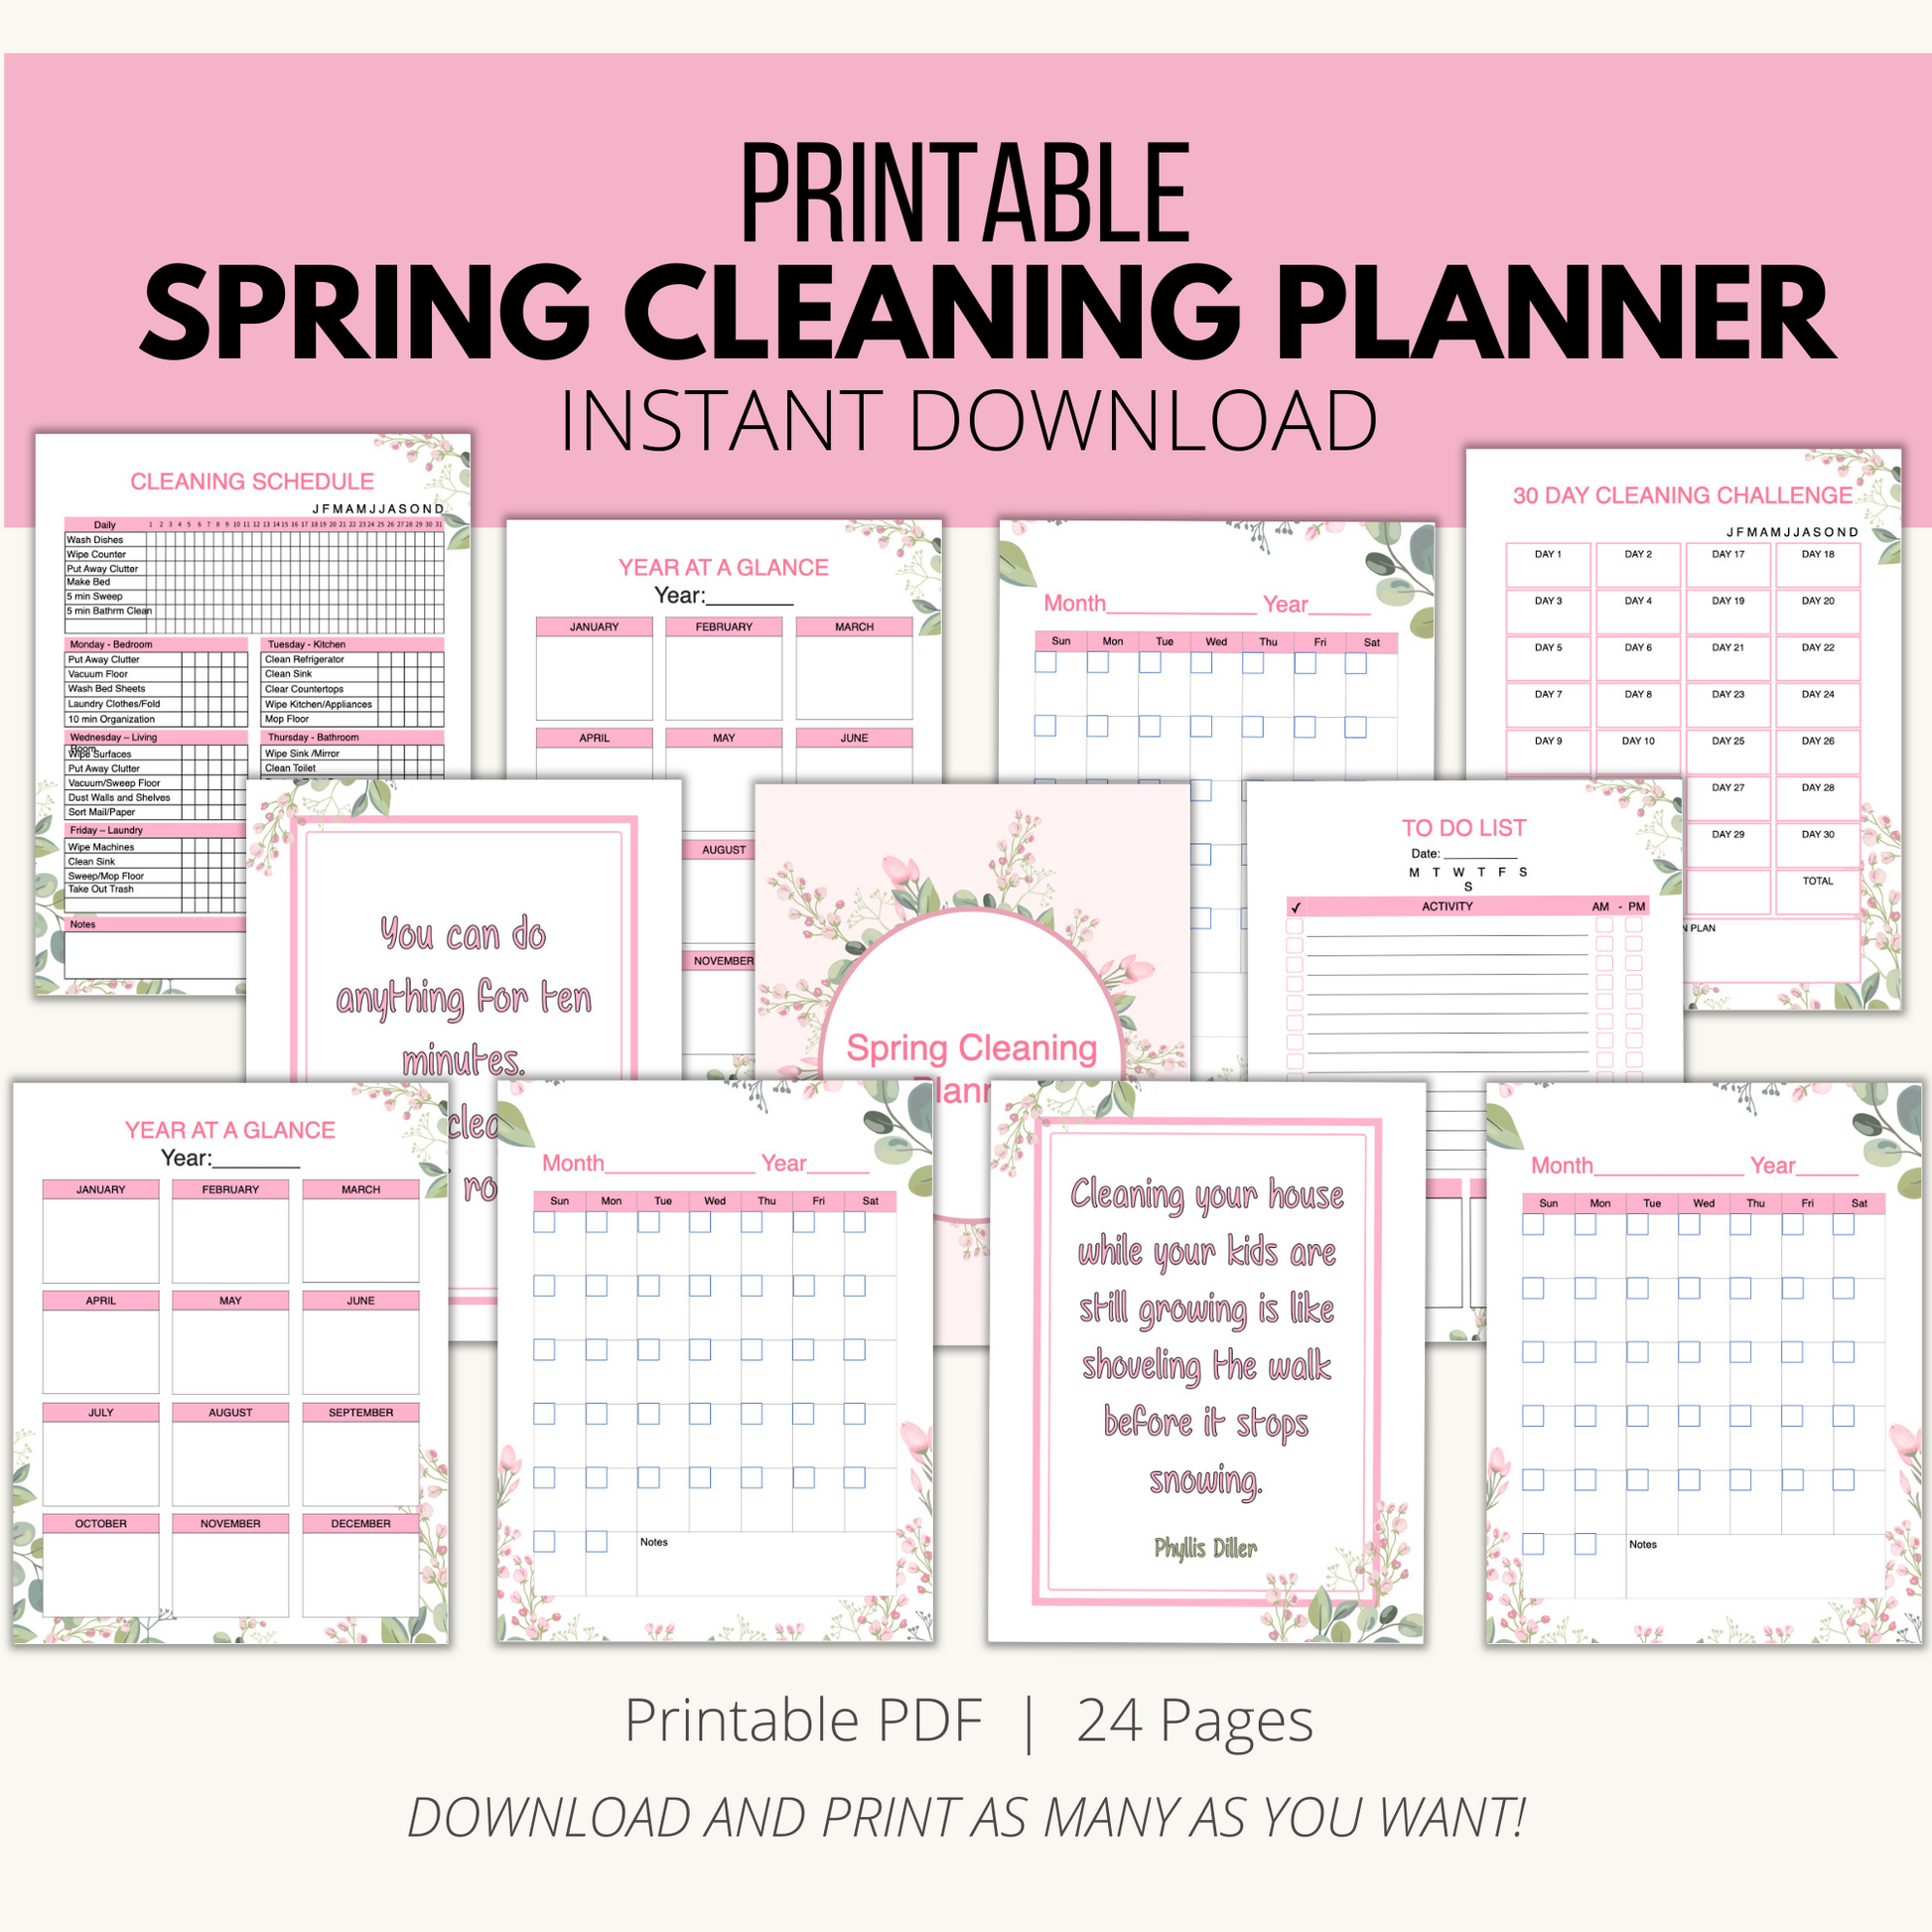 Printable Spring Cleaning Planner